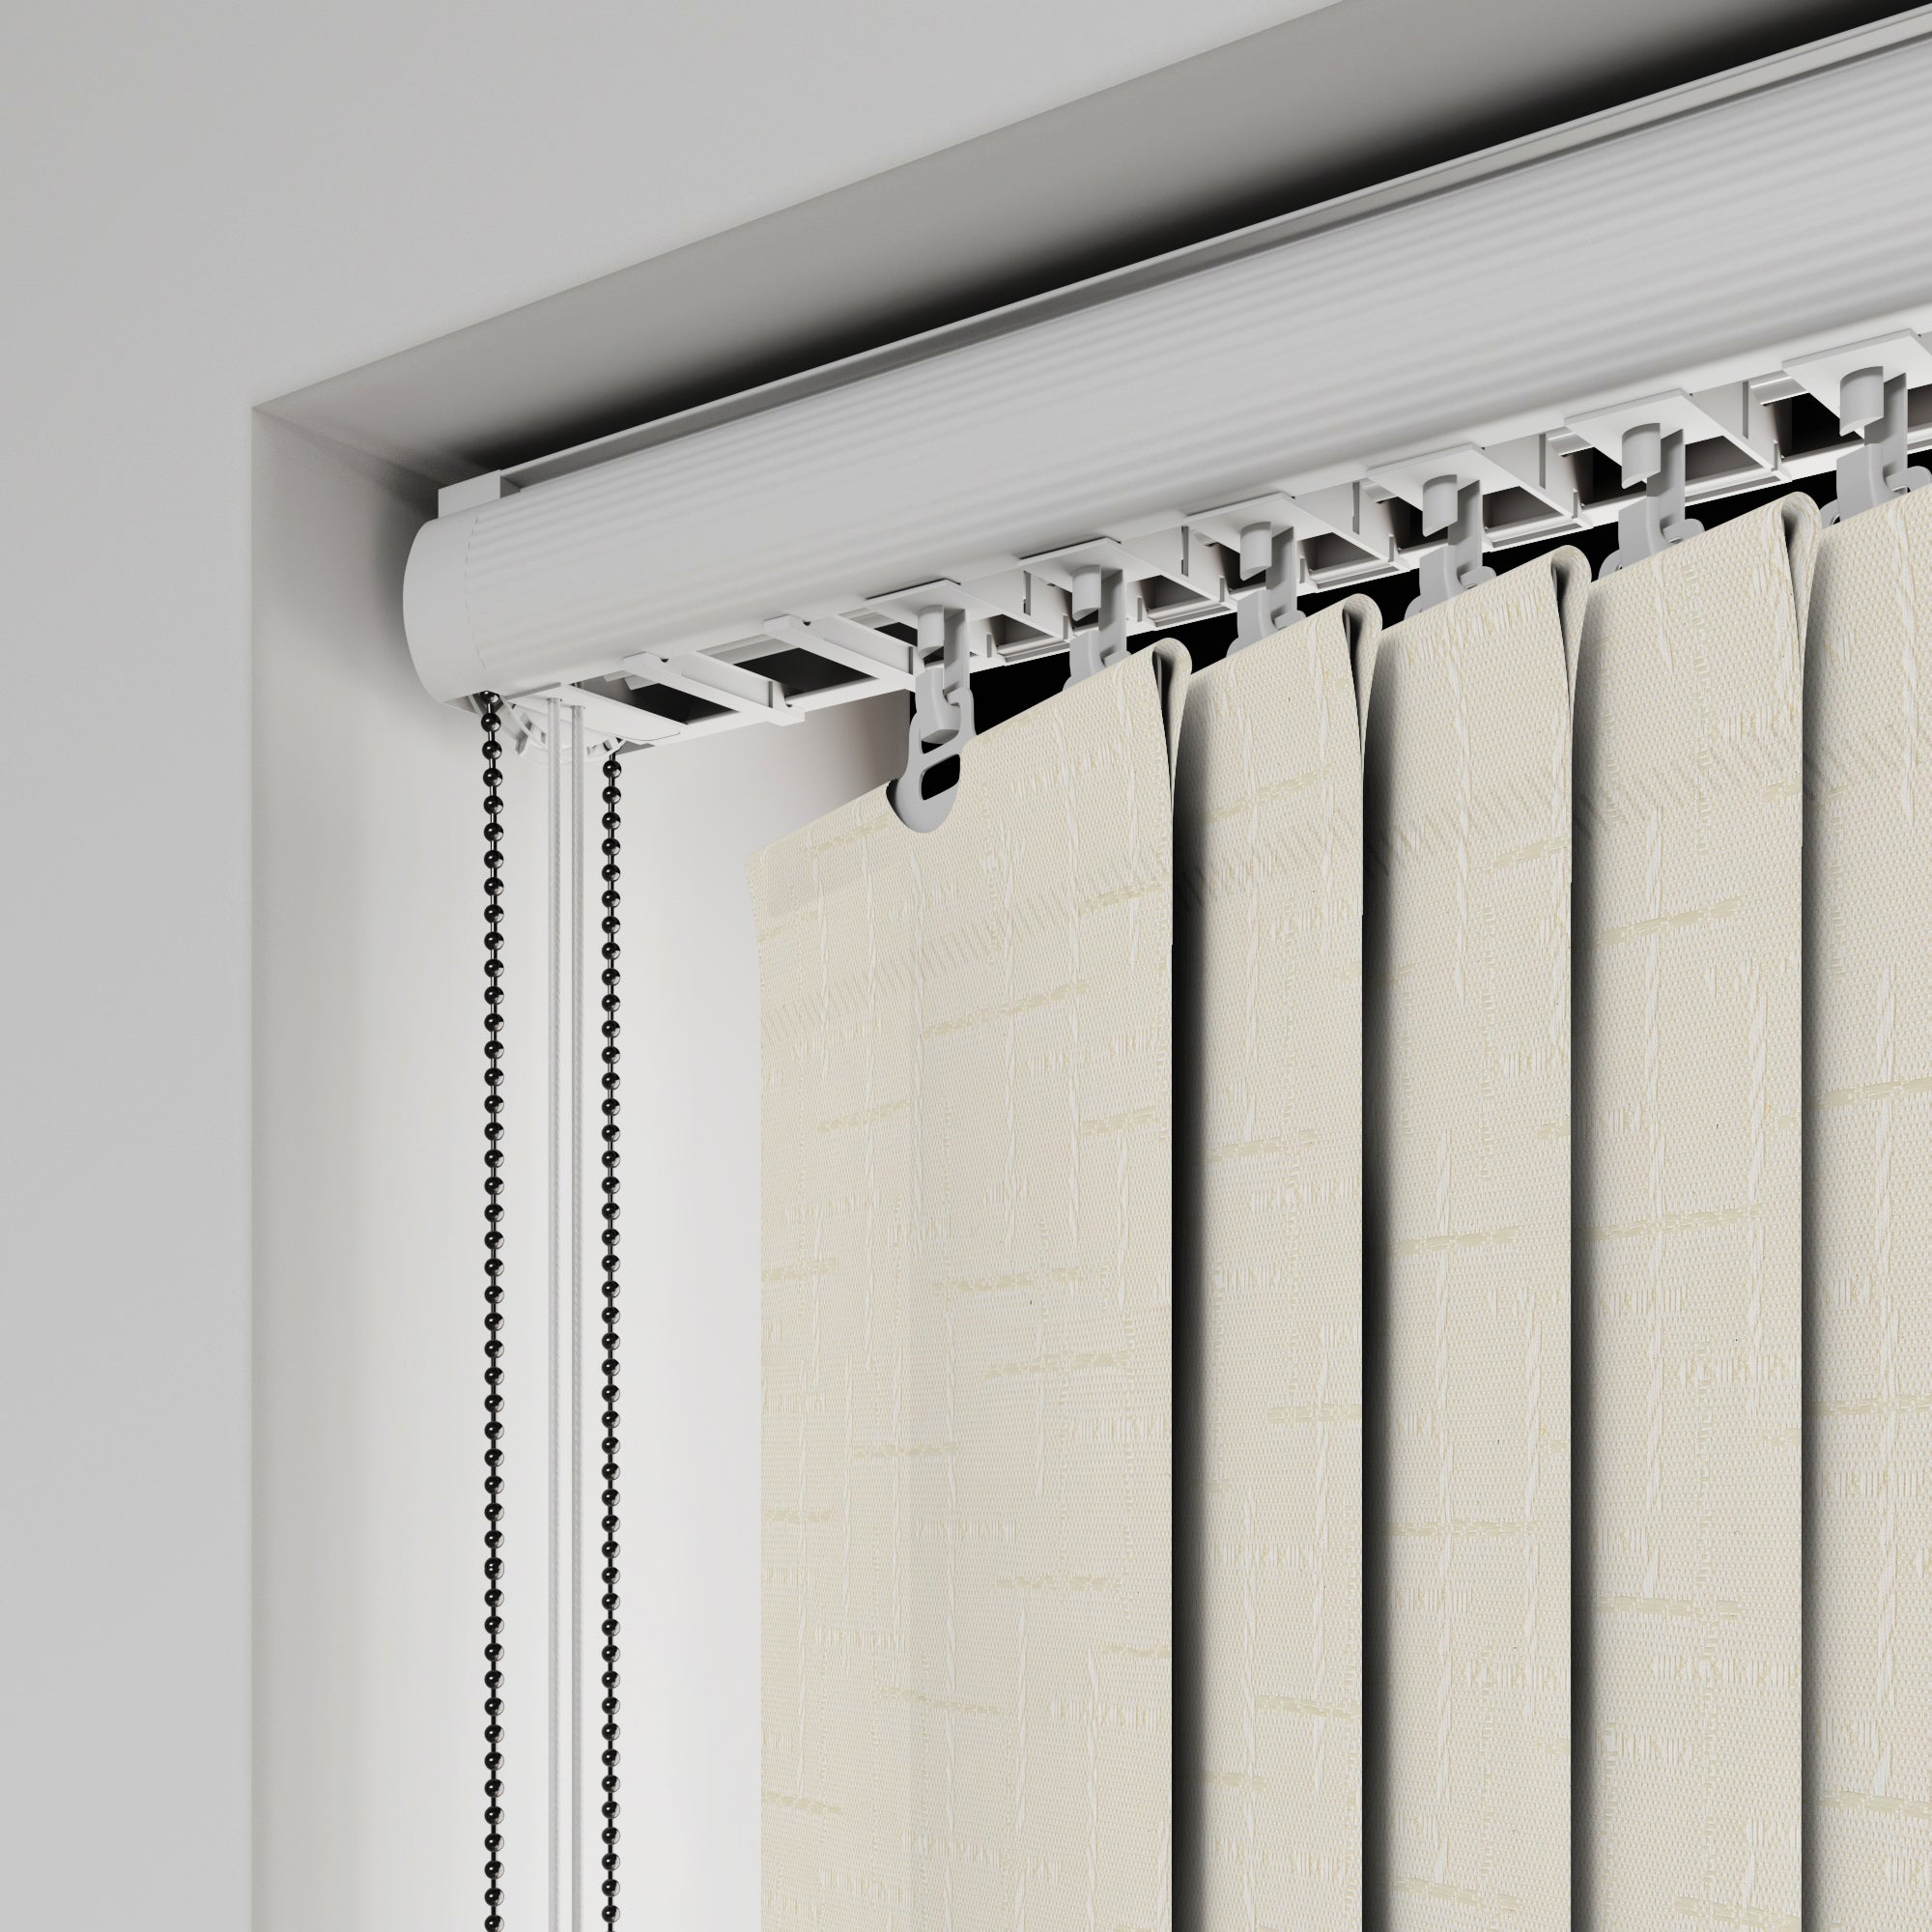 Malimo Made to Measure Vertical Blind Malimo Oyster